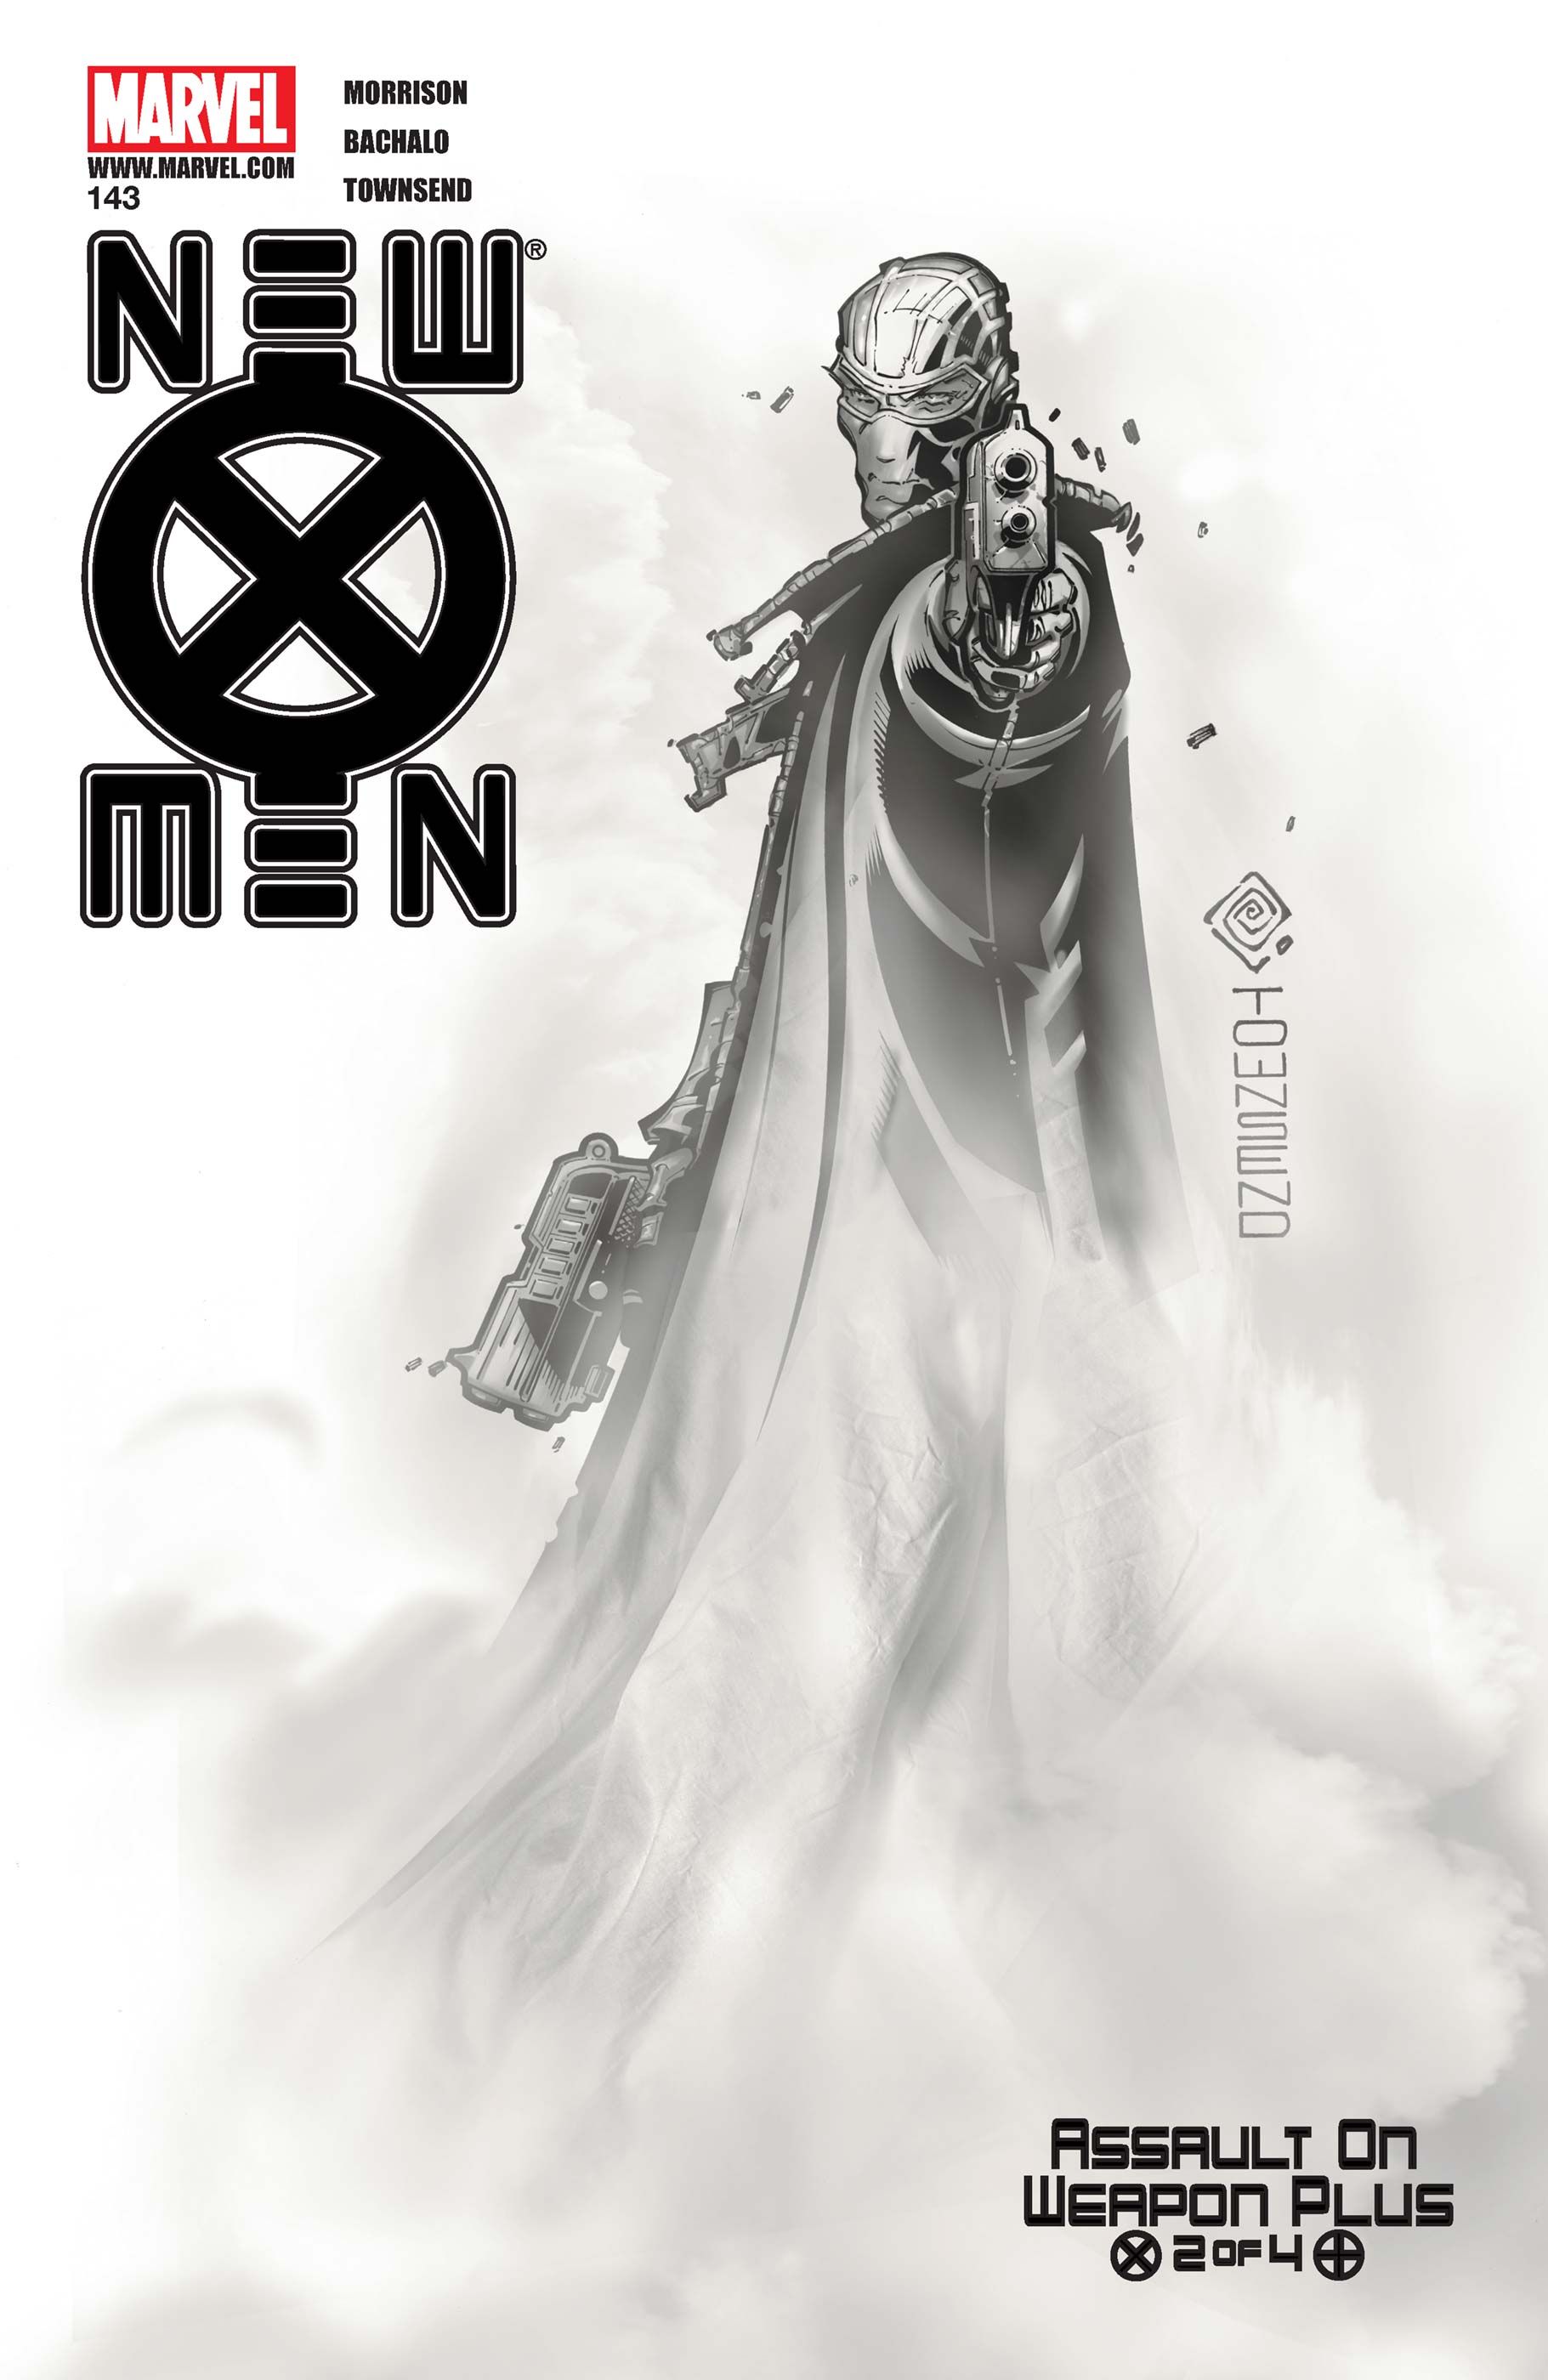 Fantomex on Chris Bachalo and Tim Townsend's Cover to New X-Men #143